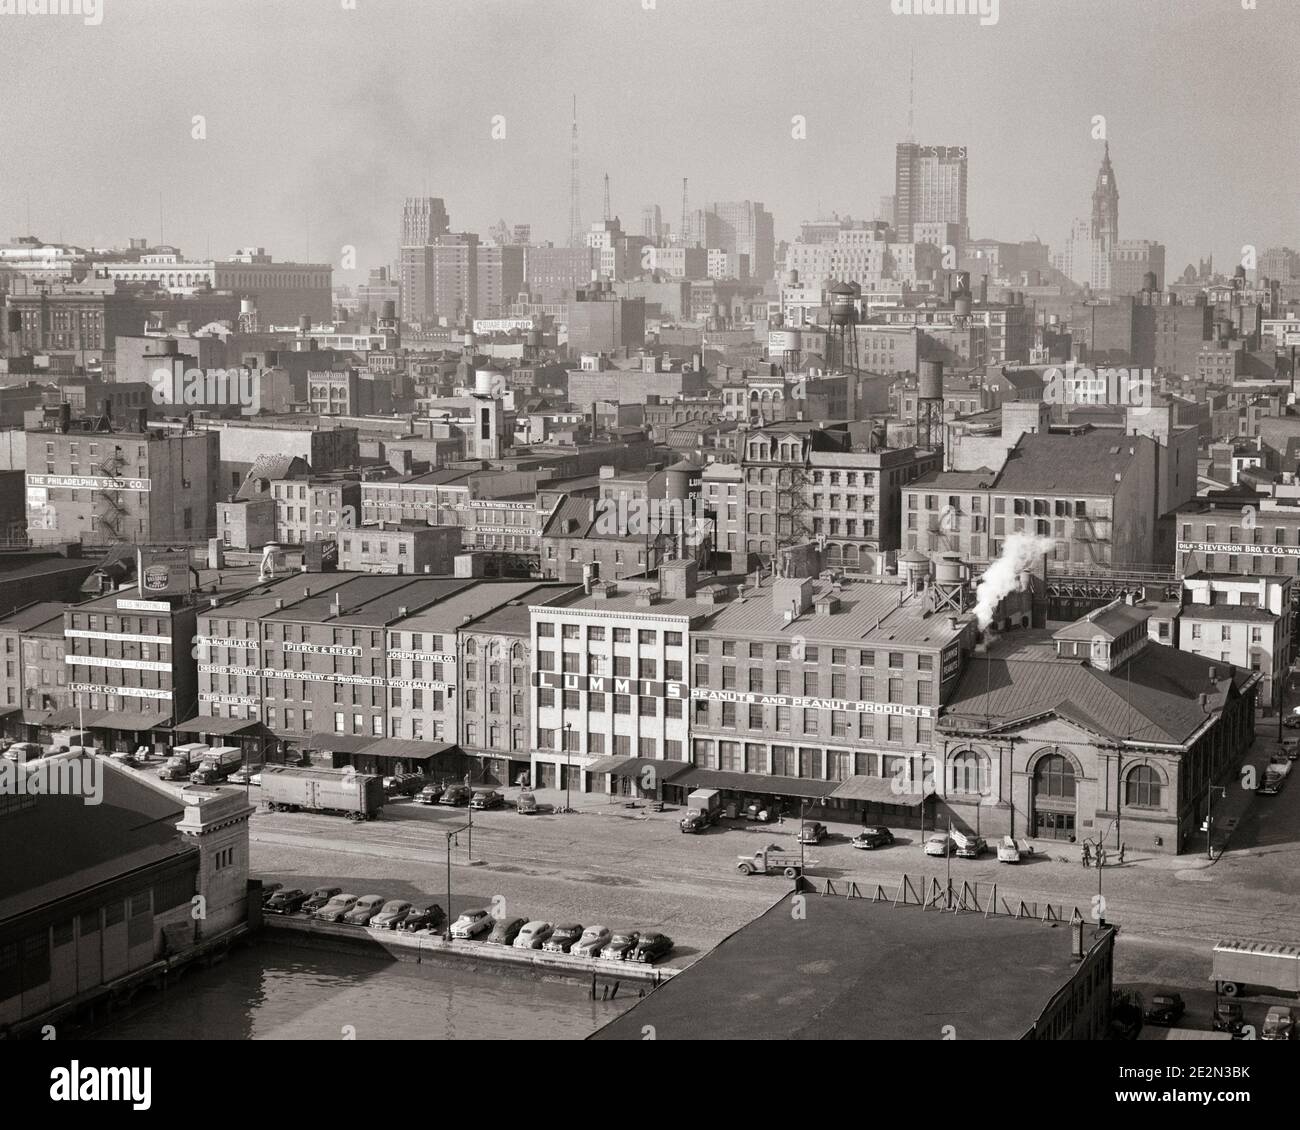 1950s MANY INDUSTRIAL BUILDINGS AND WAREHOUSES ALONG WATERFRONT AERIAL VIEW TO CENTER CITY SKYLINE PHILADELPHIA PENNSYLVANIA USA - p1408 HAR001 HARS COMMONWEALTH STRUCTURES KEYSTONE STATE WAREHOUSE EDIFICE DELAWARE RIVER SIDE-BY-SIDE WATERFRONT AERIAL VIEW BLACK AND WHITE CITY OF BROTHERLY LOVE HAR001 OLD FASHIONED Stock Photo